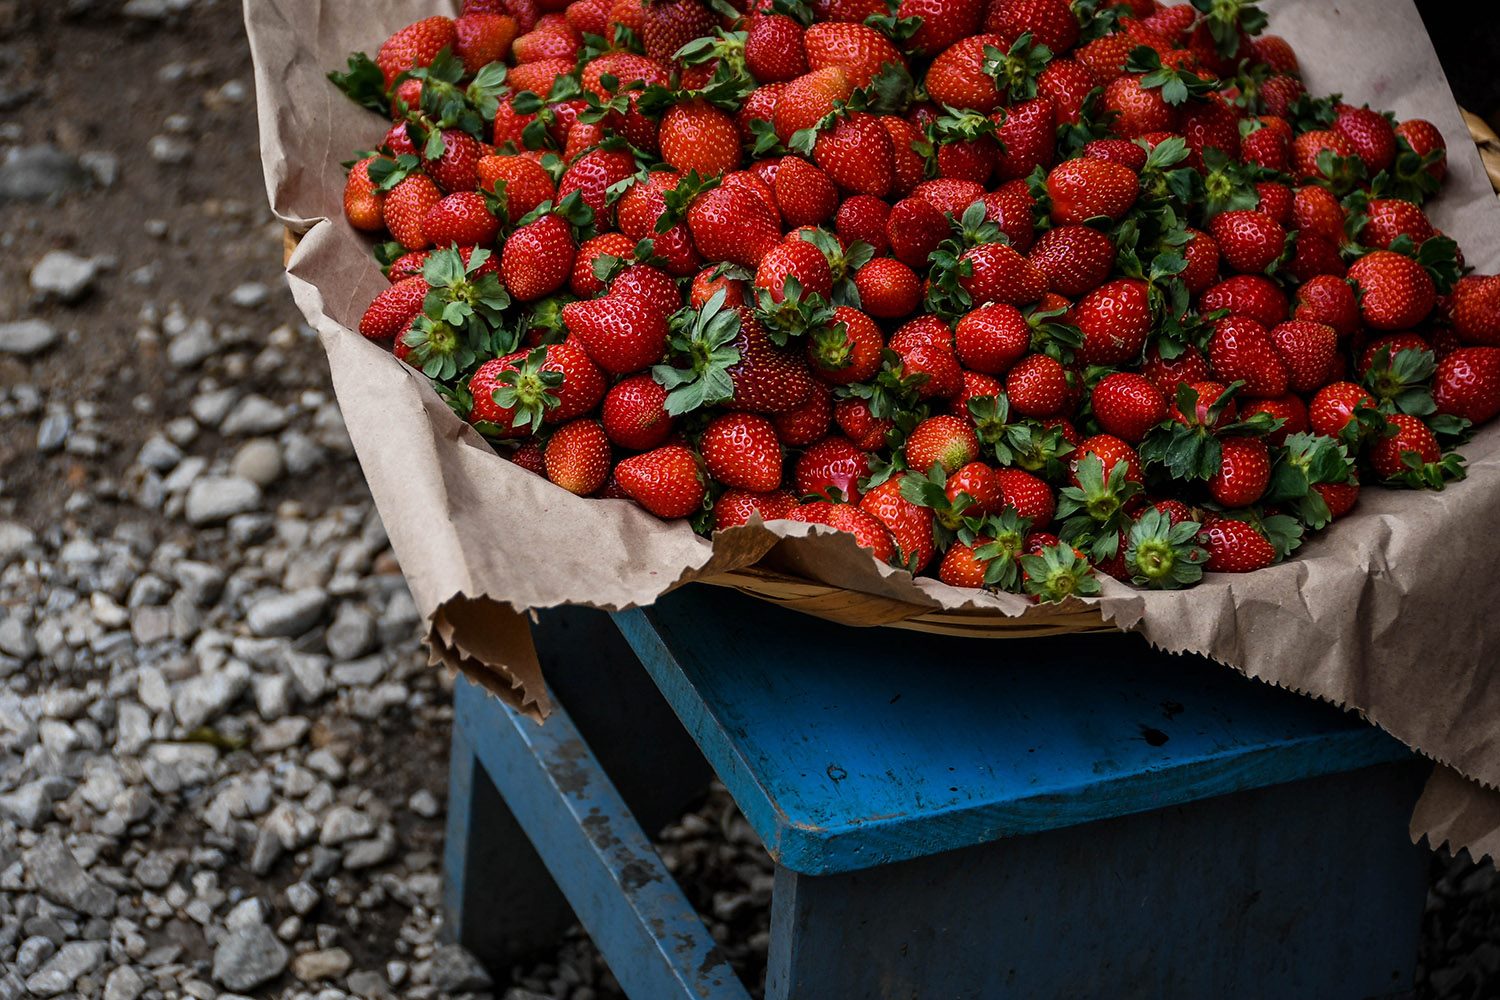 Things to Do in Oaxaca Explore the Markets Organic Market Strawberries